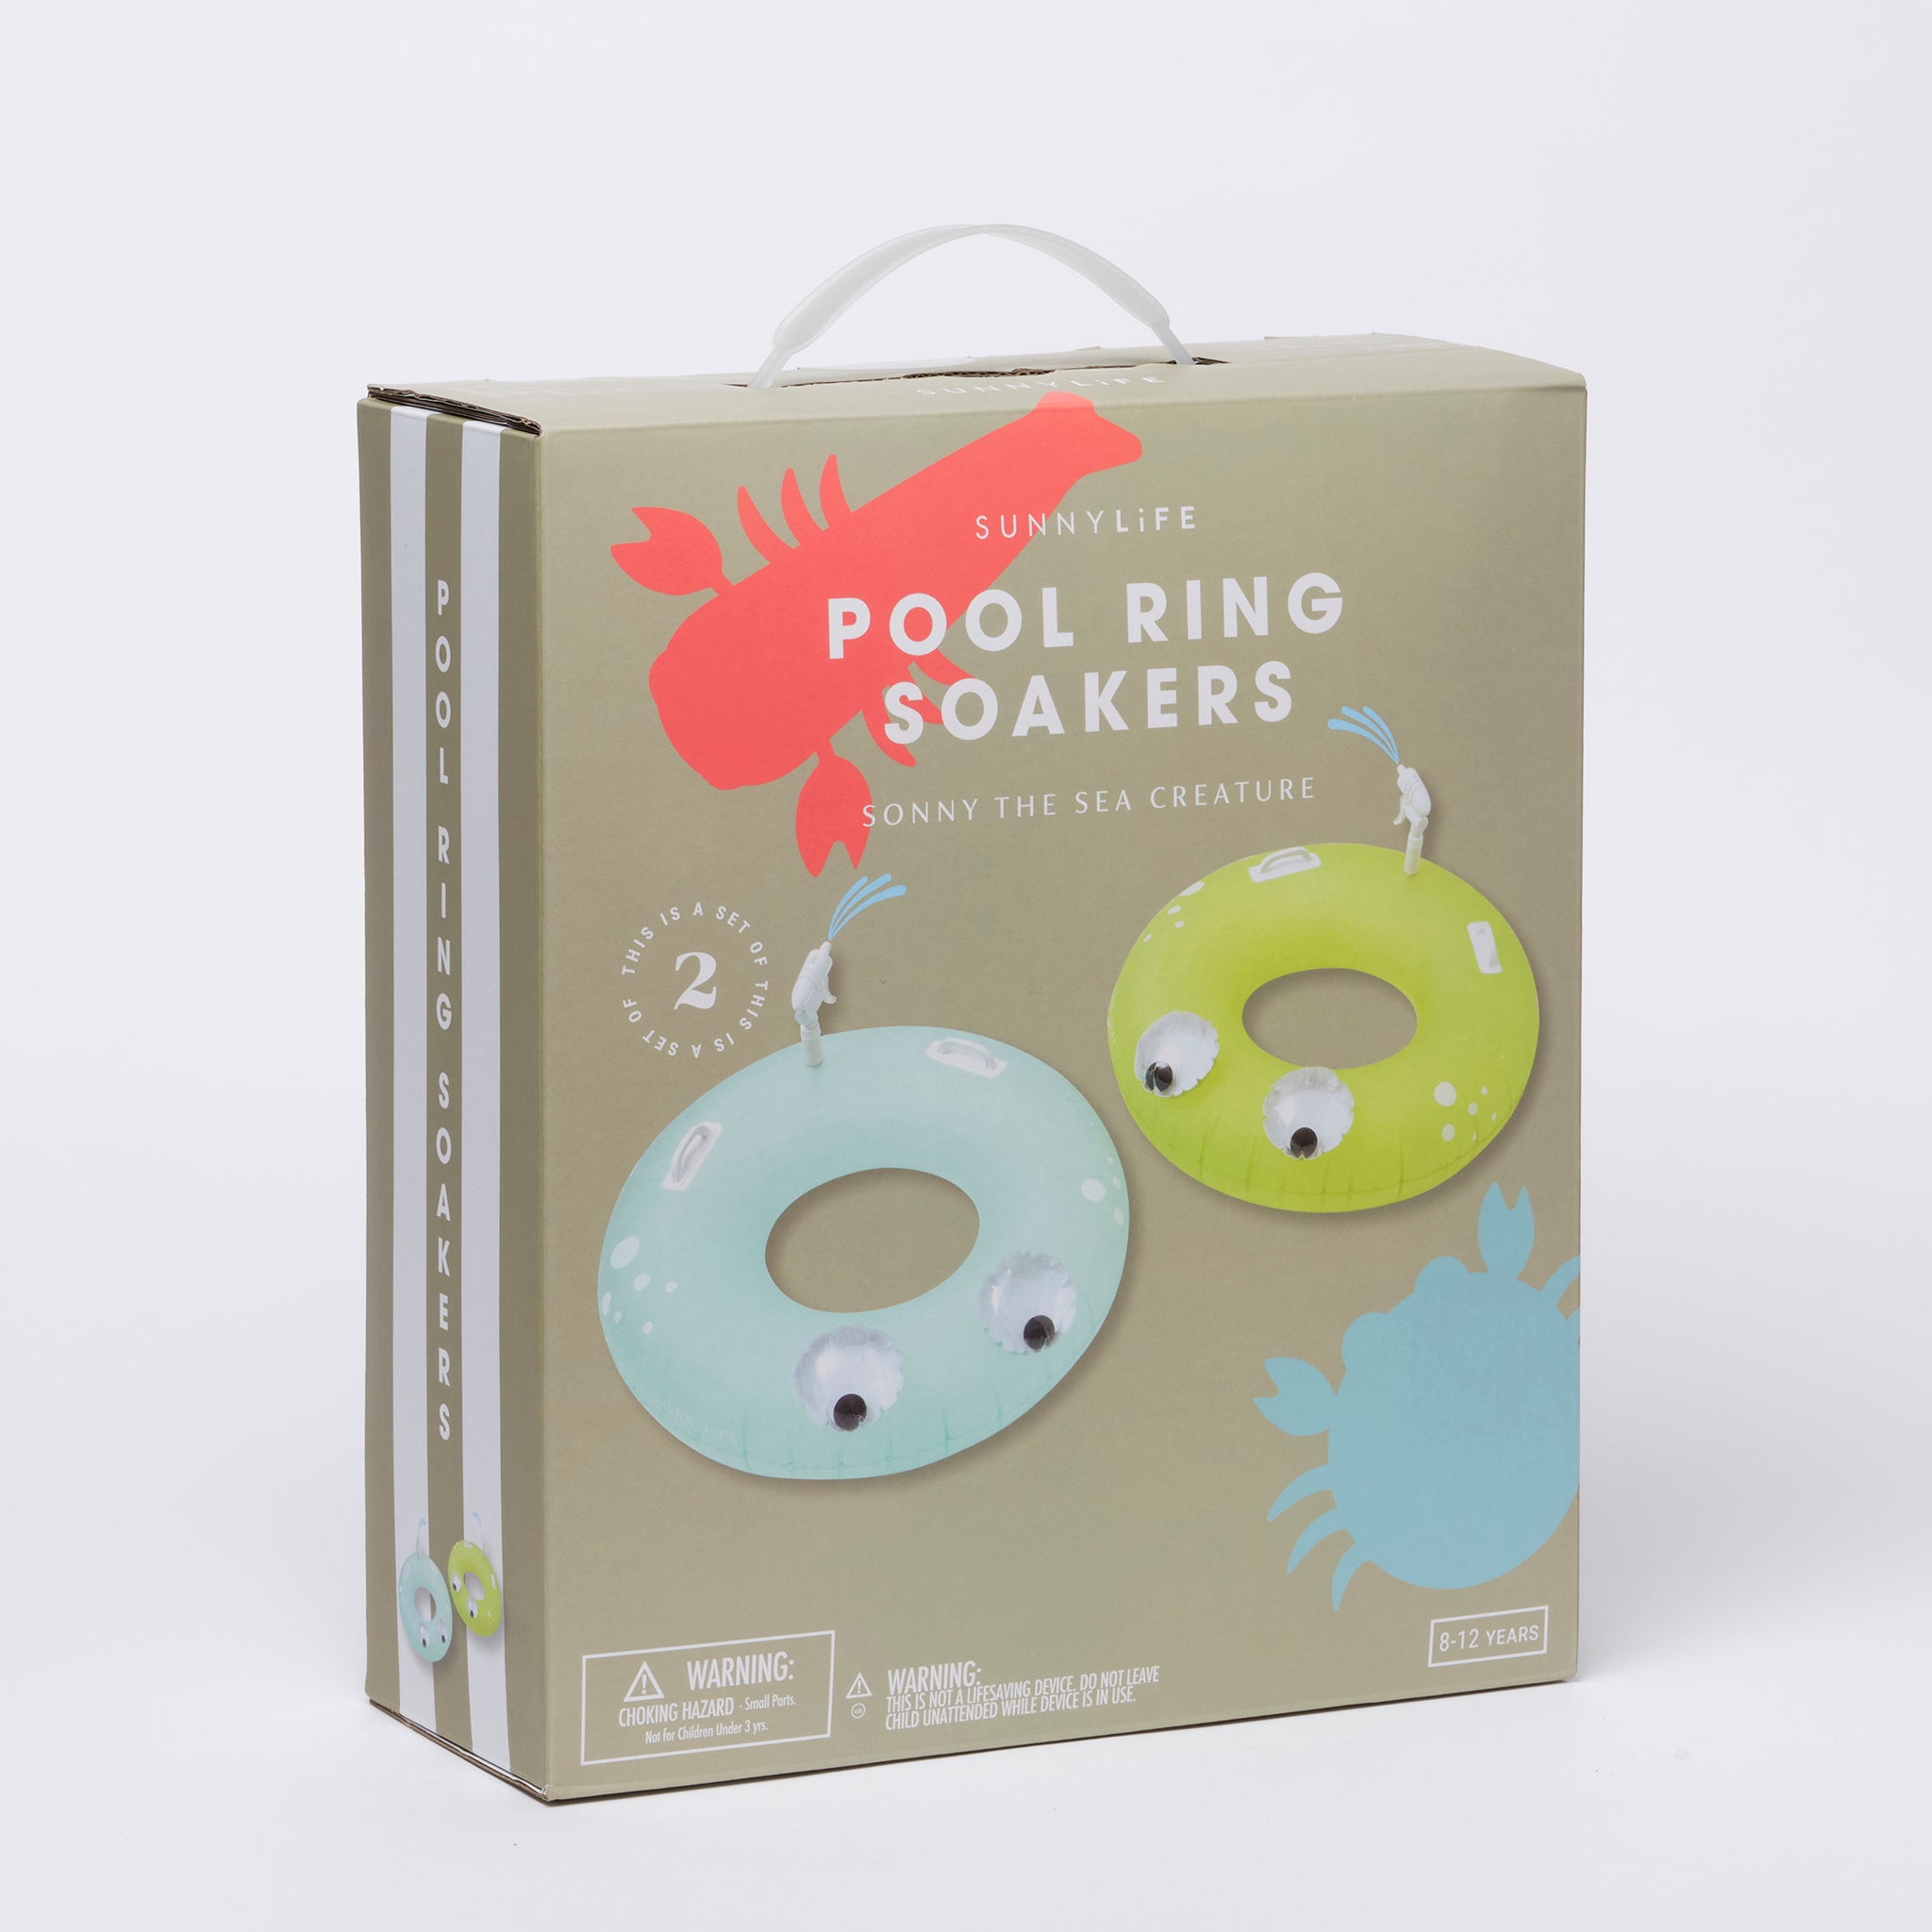 SUNNYLiFE | Pool Ring Soakers | Sonny the Sea Creature Citrus